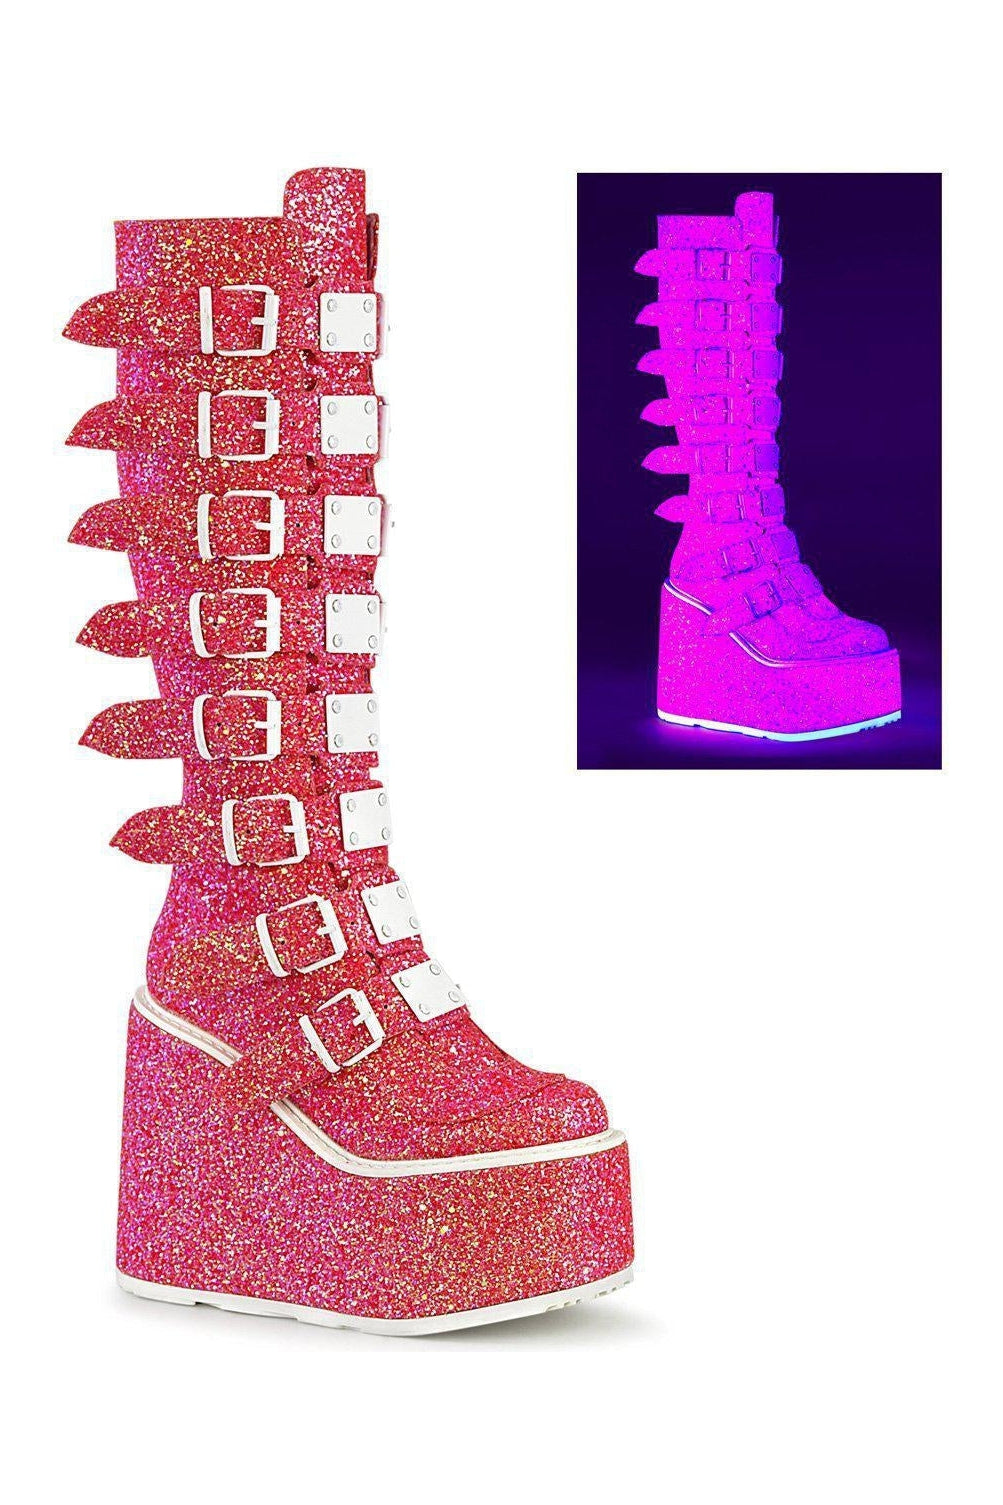 SWING-815UV Knee Boot | Pink Glitter Faux Leather-Knee Boots-Demonia-SEXYSHOES.COM